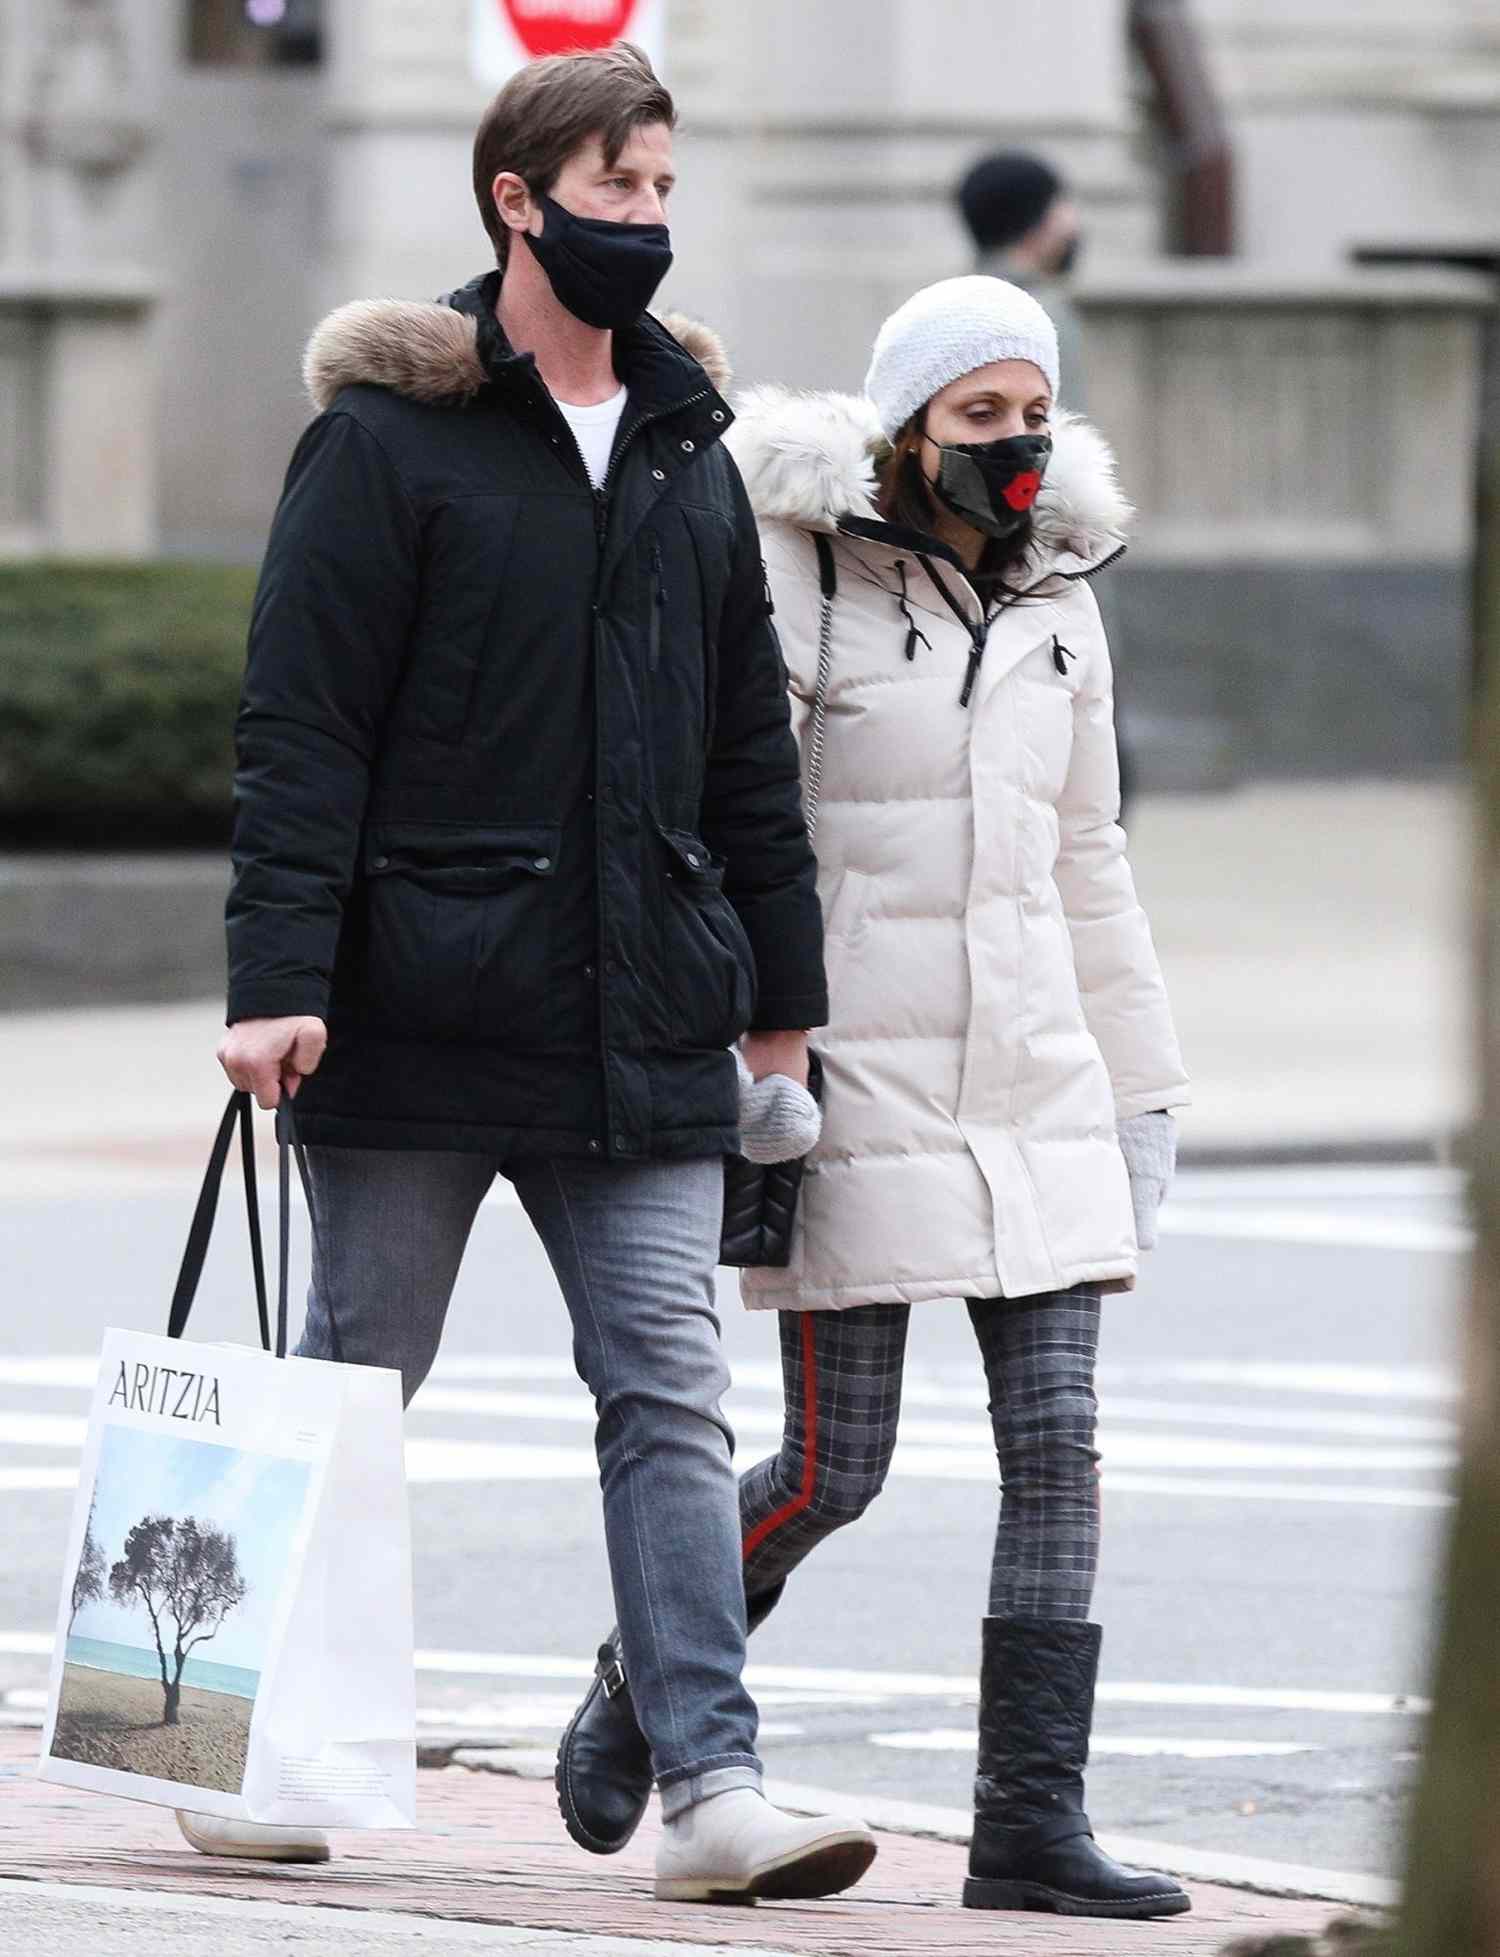 Bethenny Frankel and Paul Bernon are spotted holding hands while out doing some shopping together in Boston